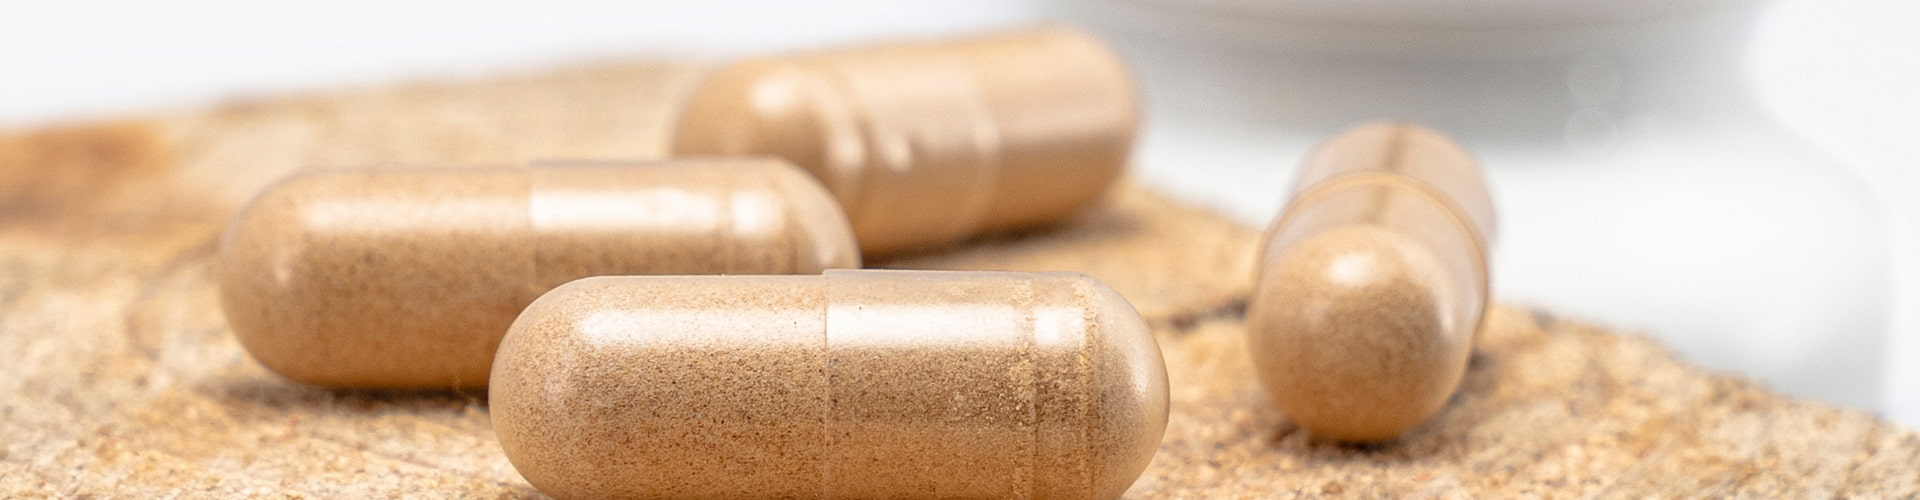 Kratom Capsules: Uses, Effects, And More